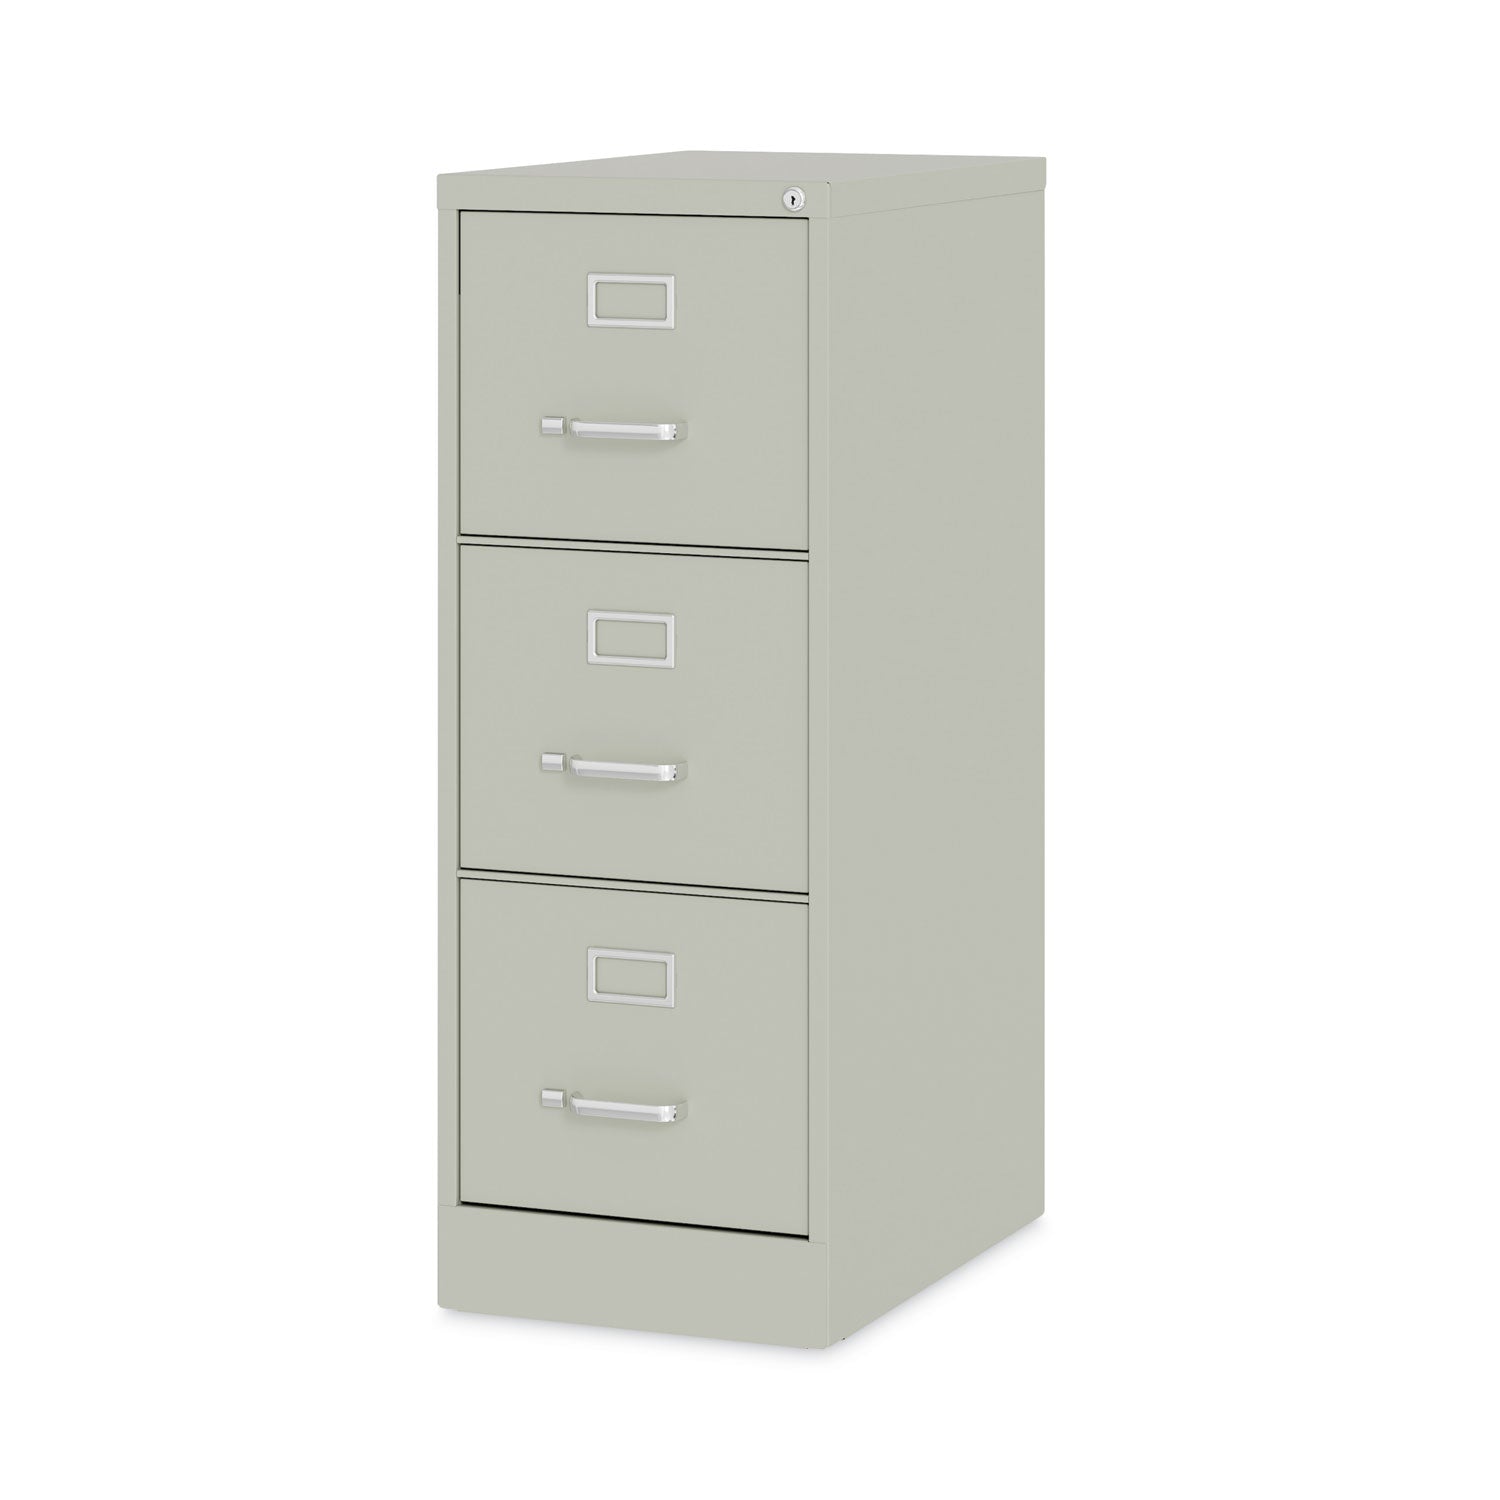 vertical-letter-file-cabinet-3-letter-size-file-drawers-light-gray-15-x-22-x-4019_hid24857 - 2